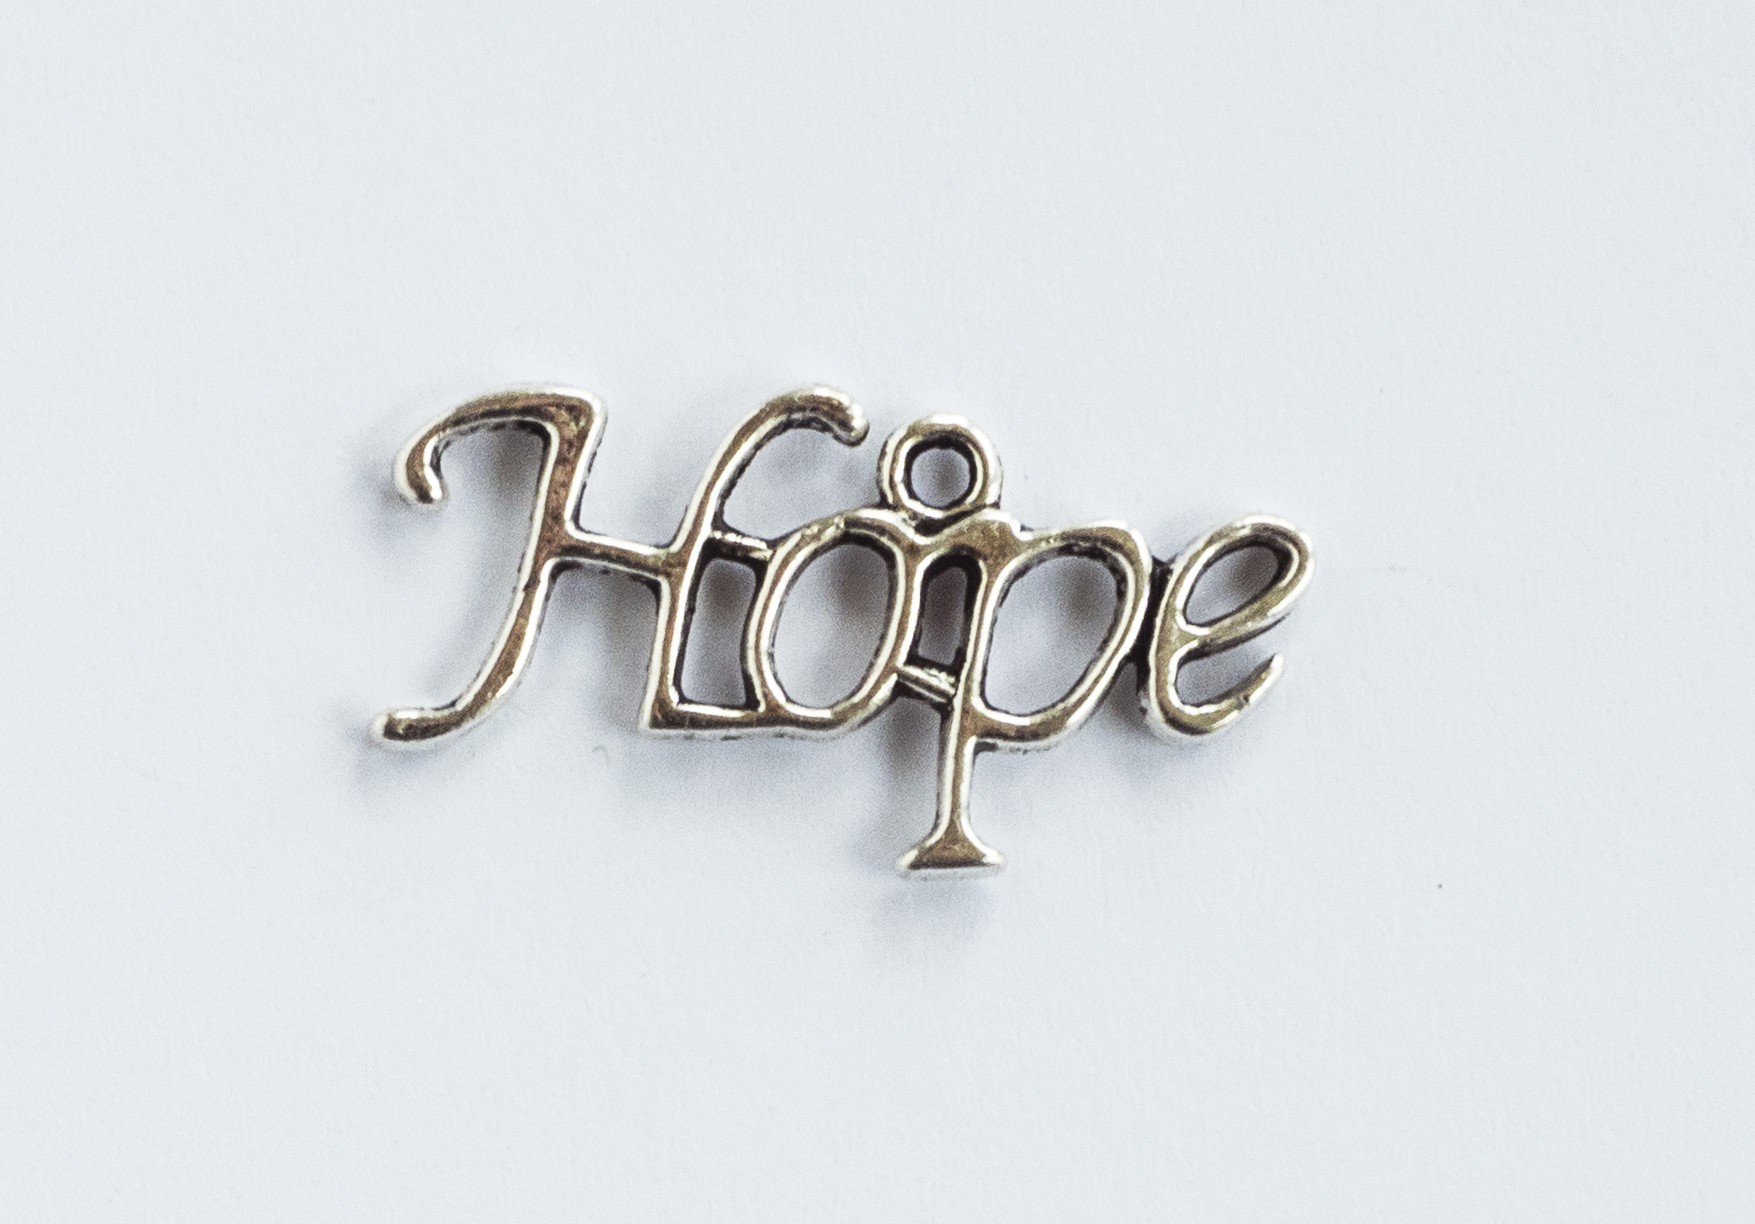 Hope Silver Tone Charms - 3 Pack